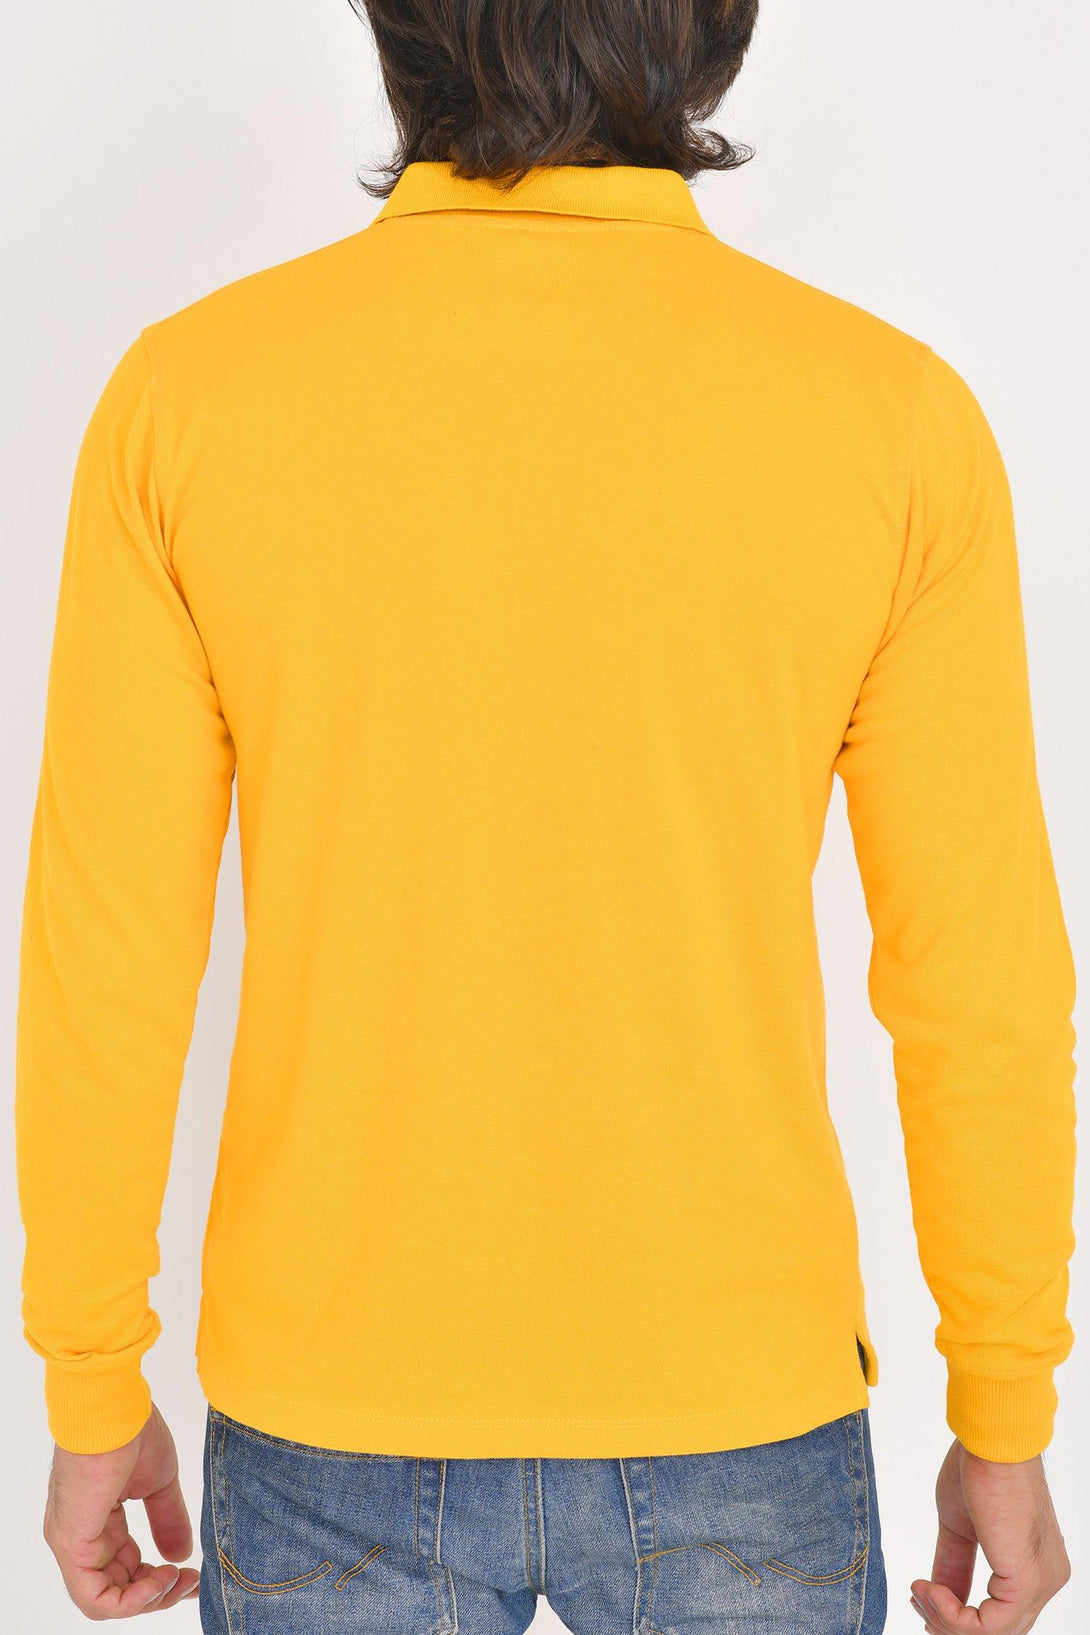 Polo Full Sleeve Yellow Orange Pack of 2 - FTS